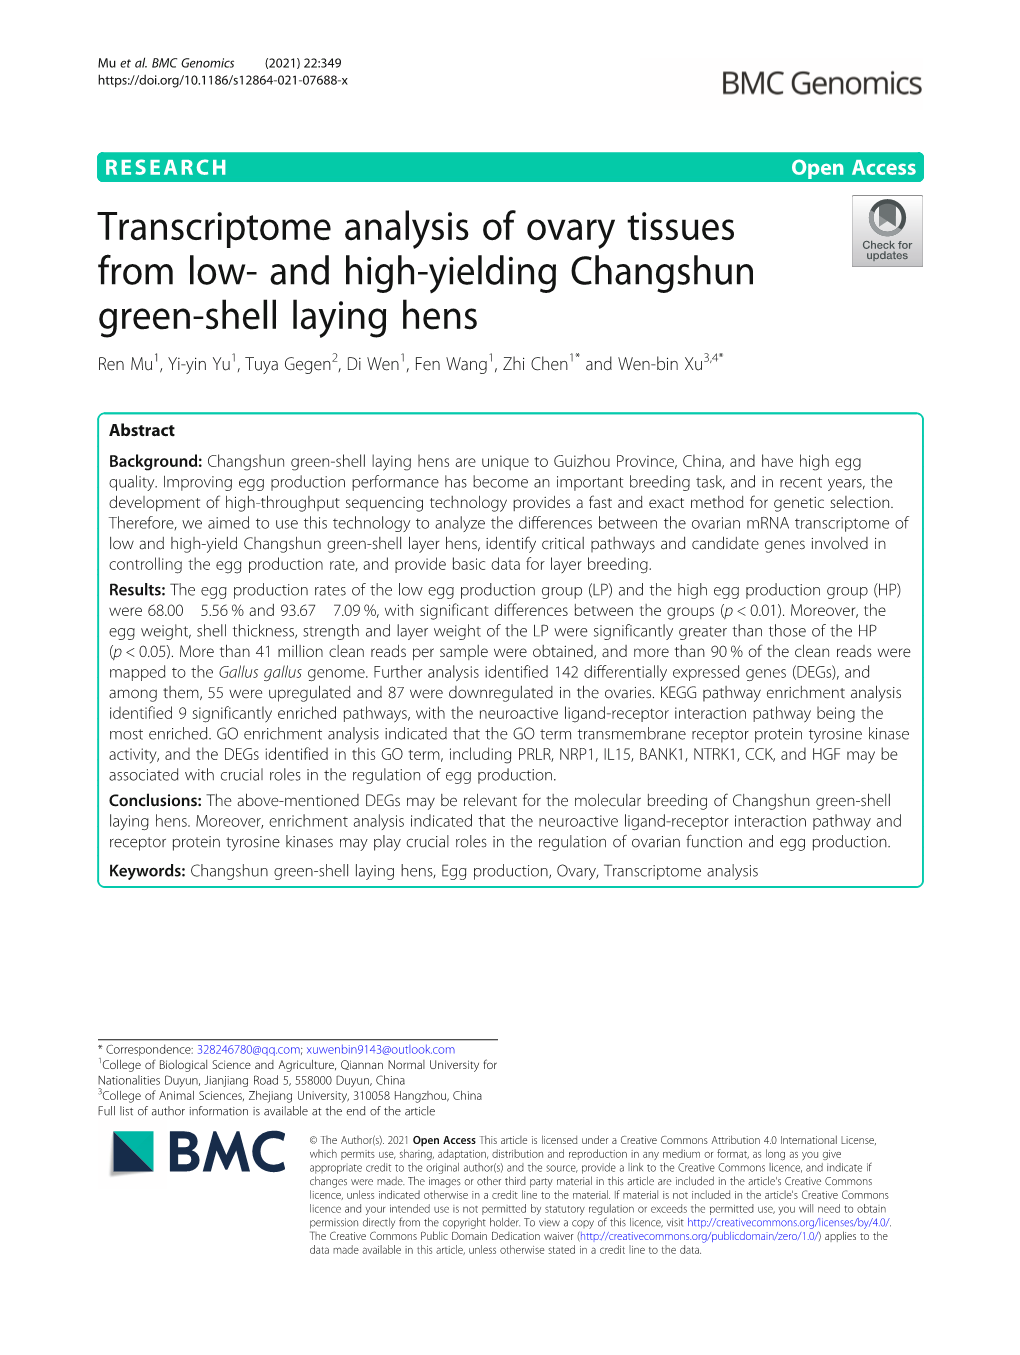 Transcriptome Analysis of Ovary Tissues from Low- and High-Yielding